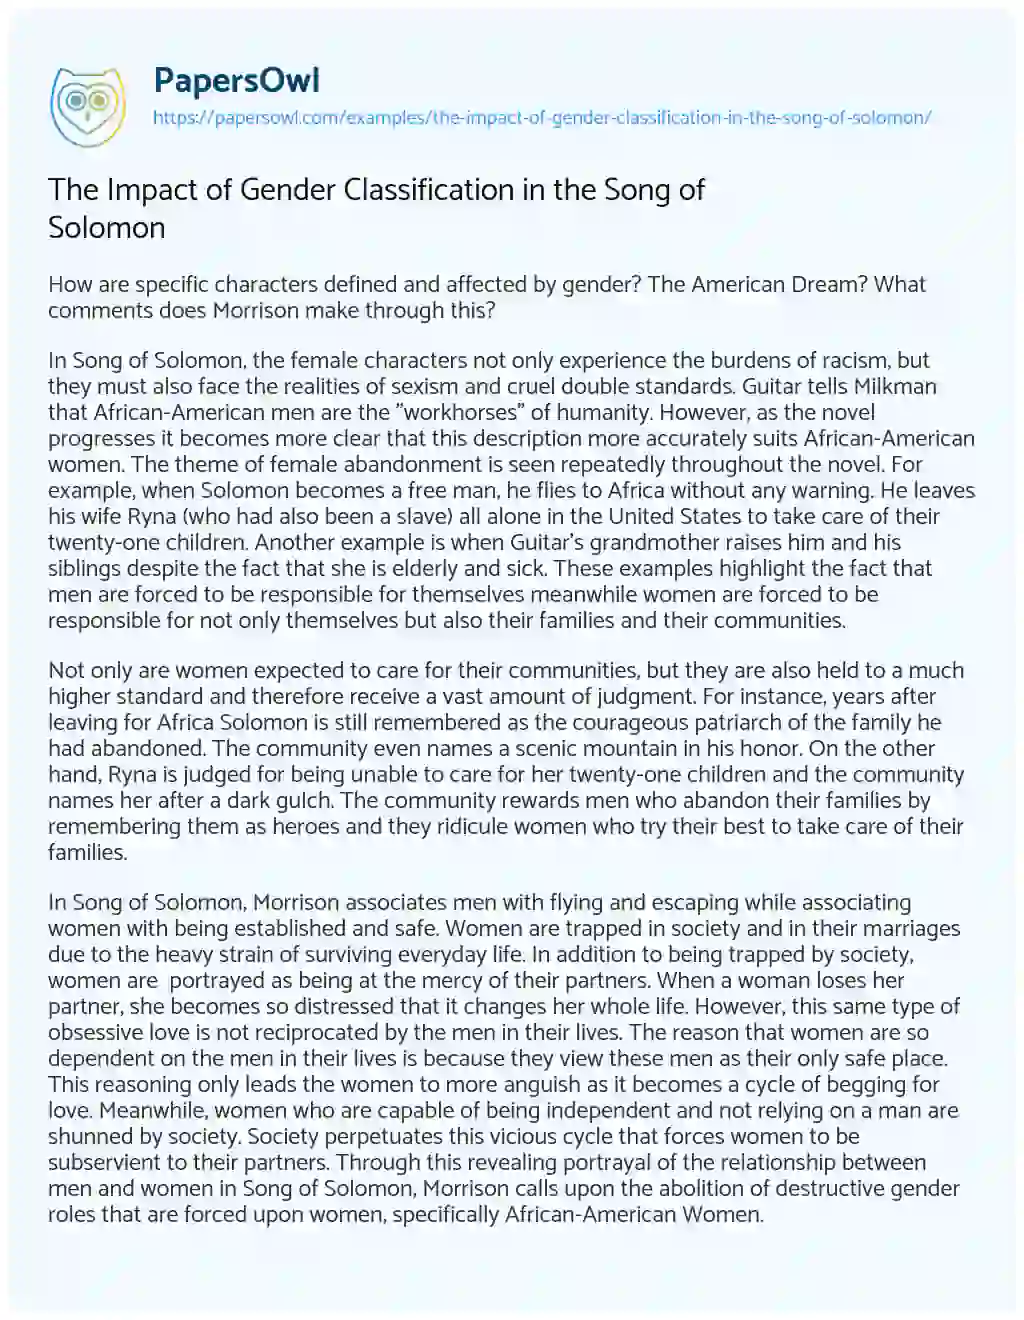 Essay on The Impact of Gender Classification in the Song of Solomon